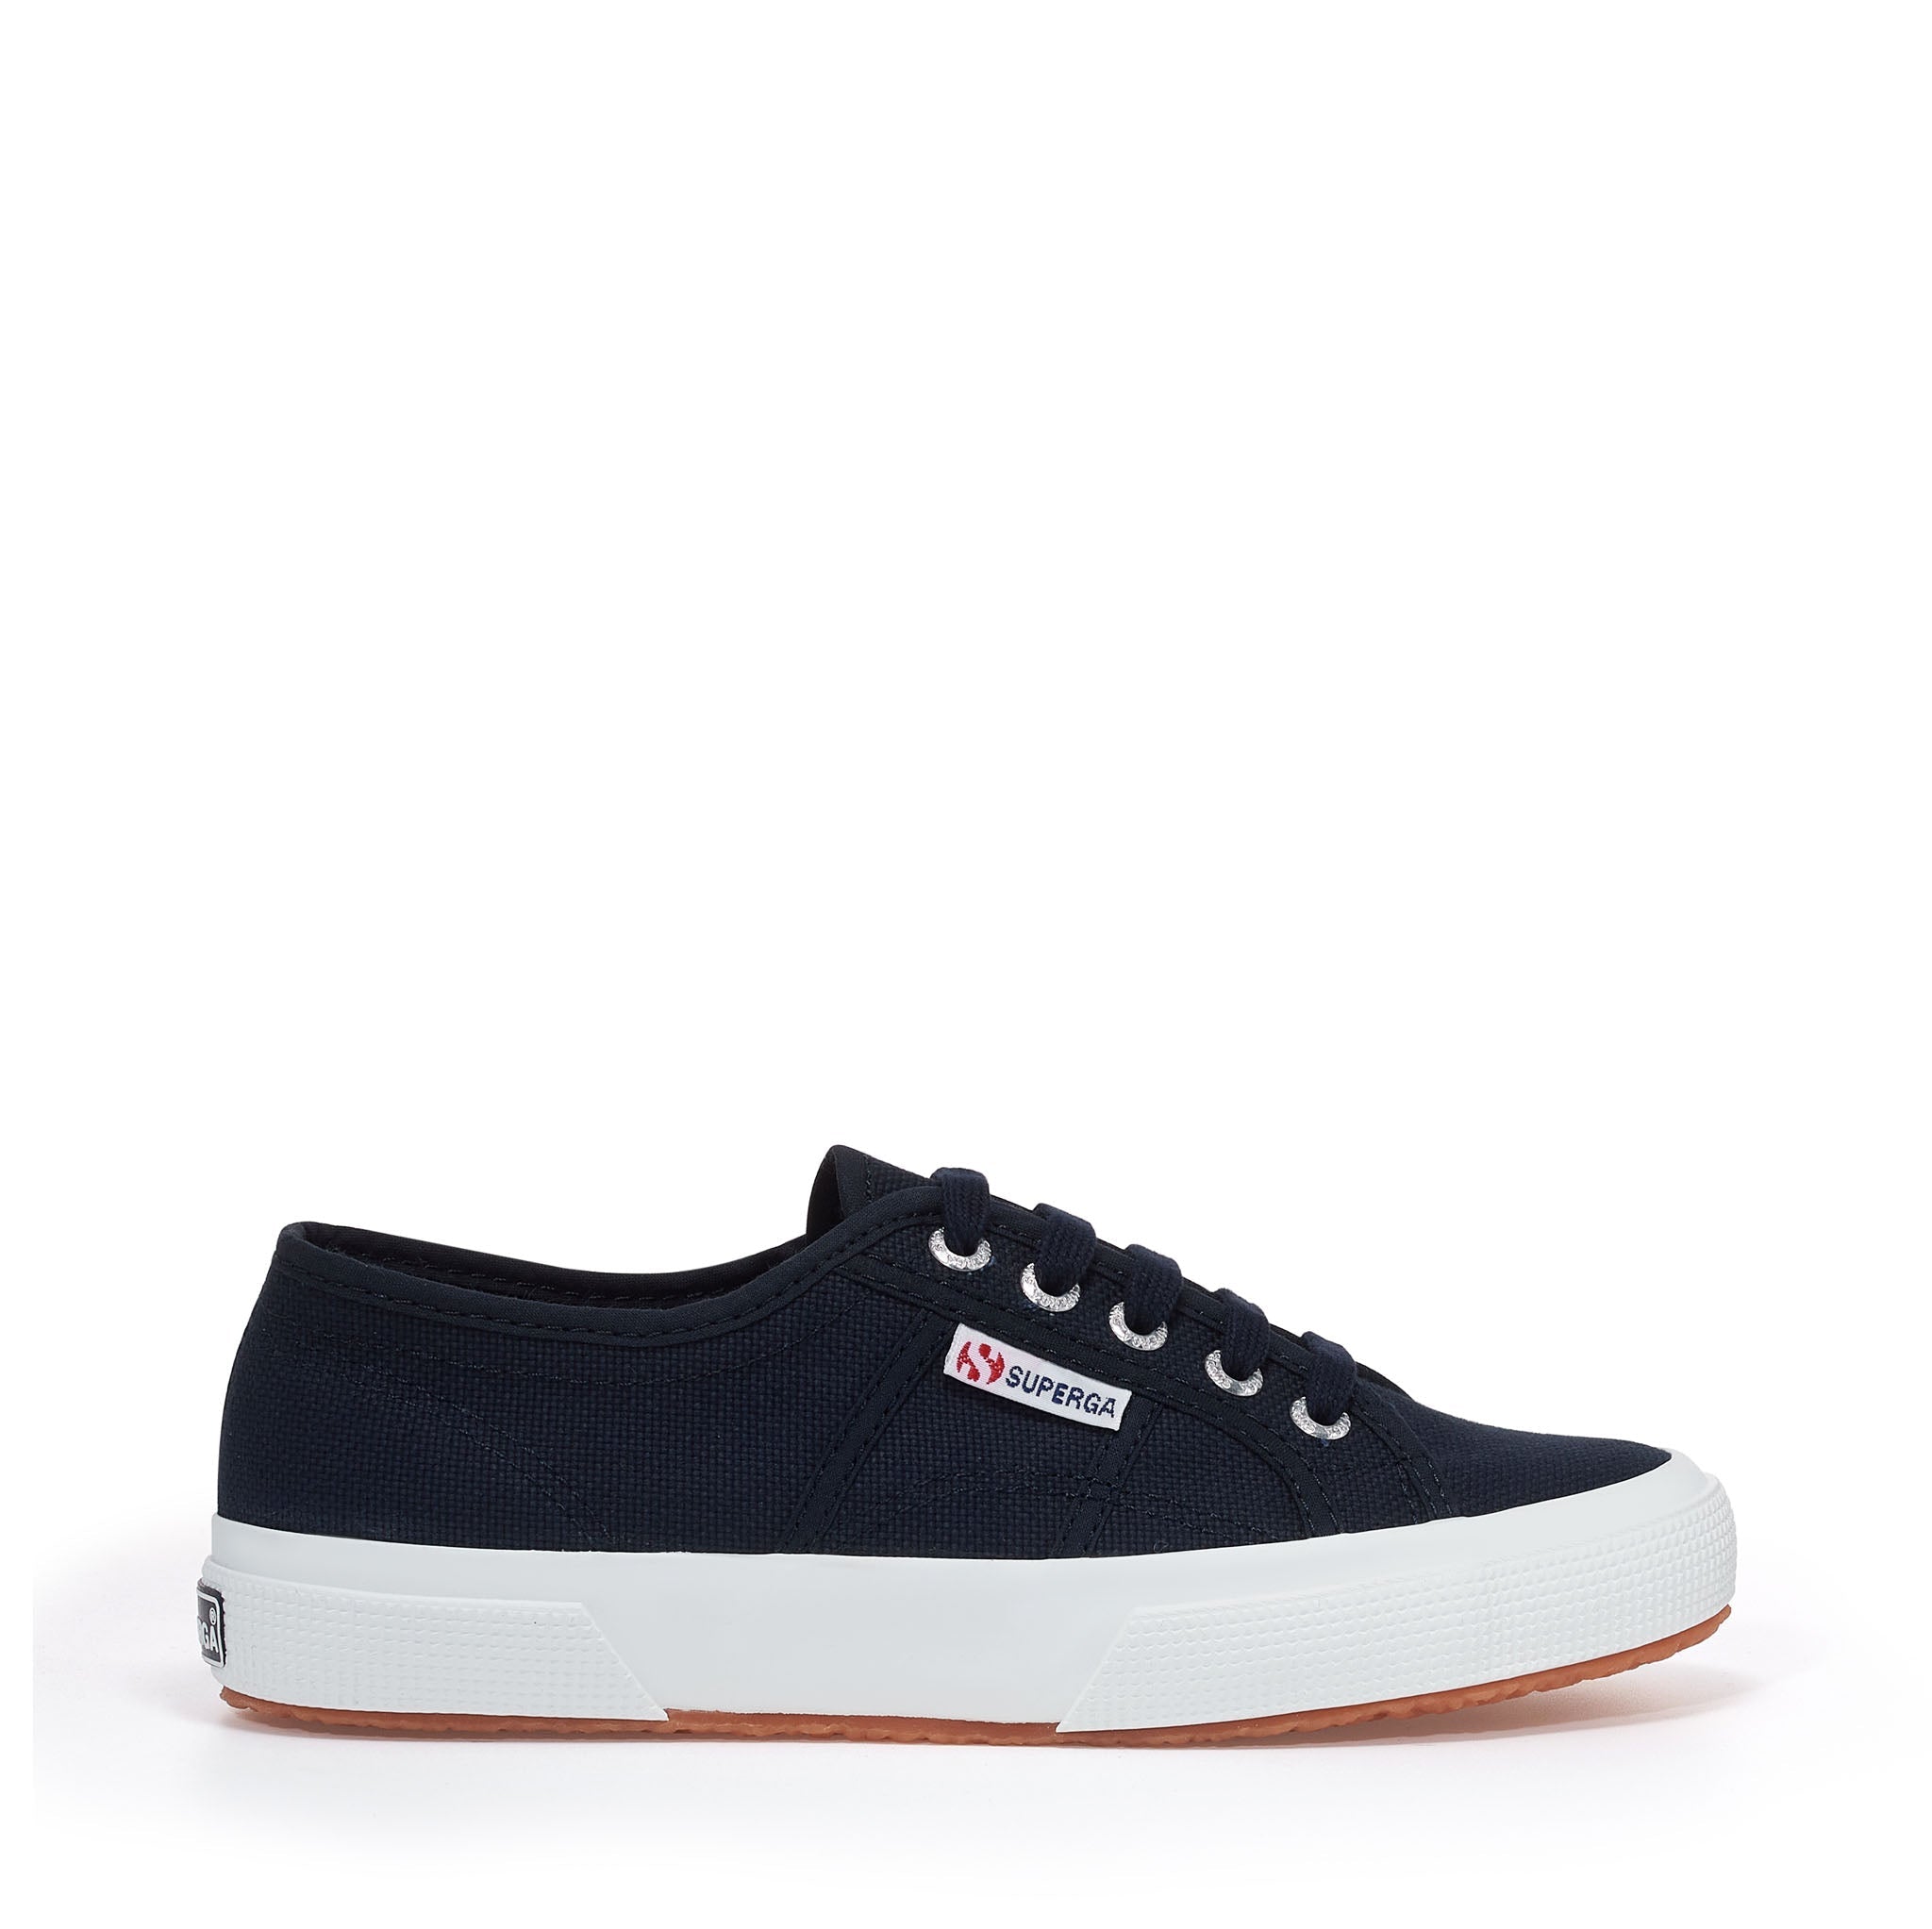 Superga 2750 Cotu Classic Sneakers - Navy White. Side view.